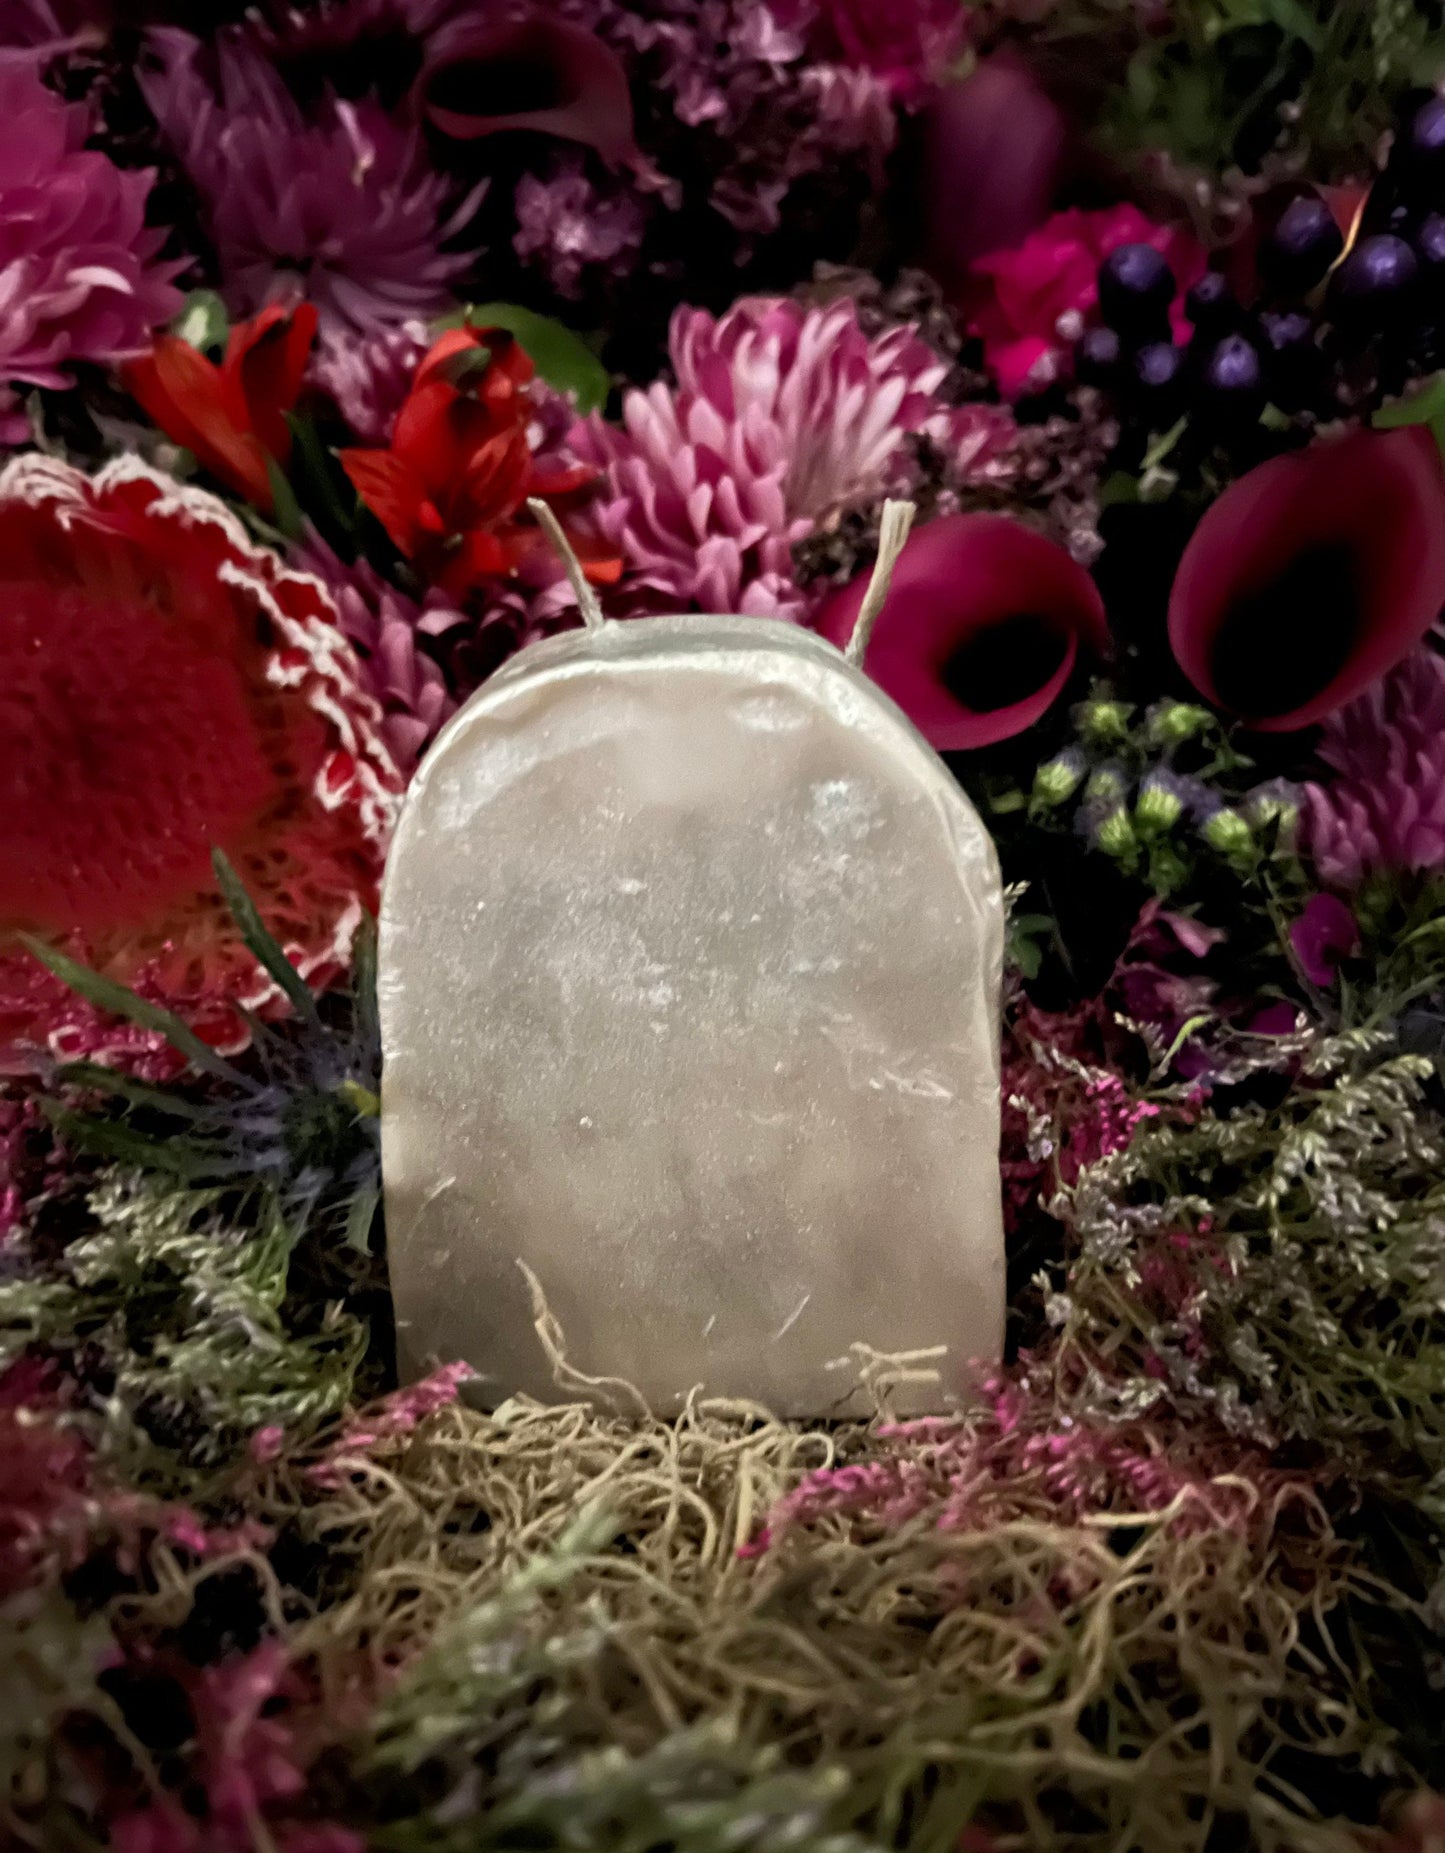 Tombstone or Headstone Candle